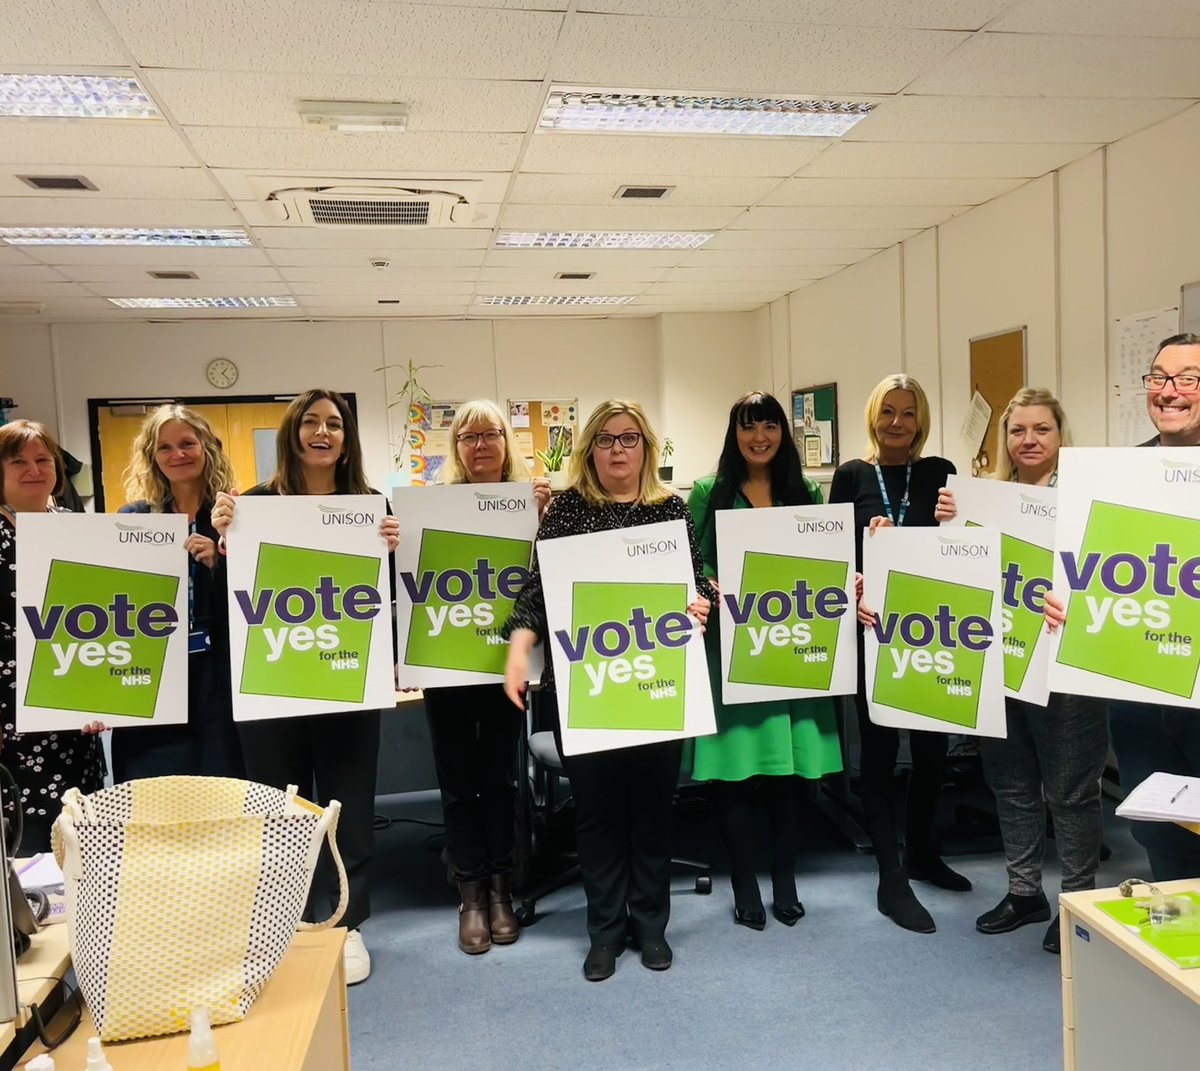 It’s a Yes from us! We all deserve so much more @unisontheunion @UNISONOurNHS @UNISONEastMids #VoteYesfortheNHS ✊